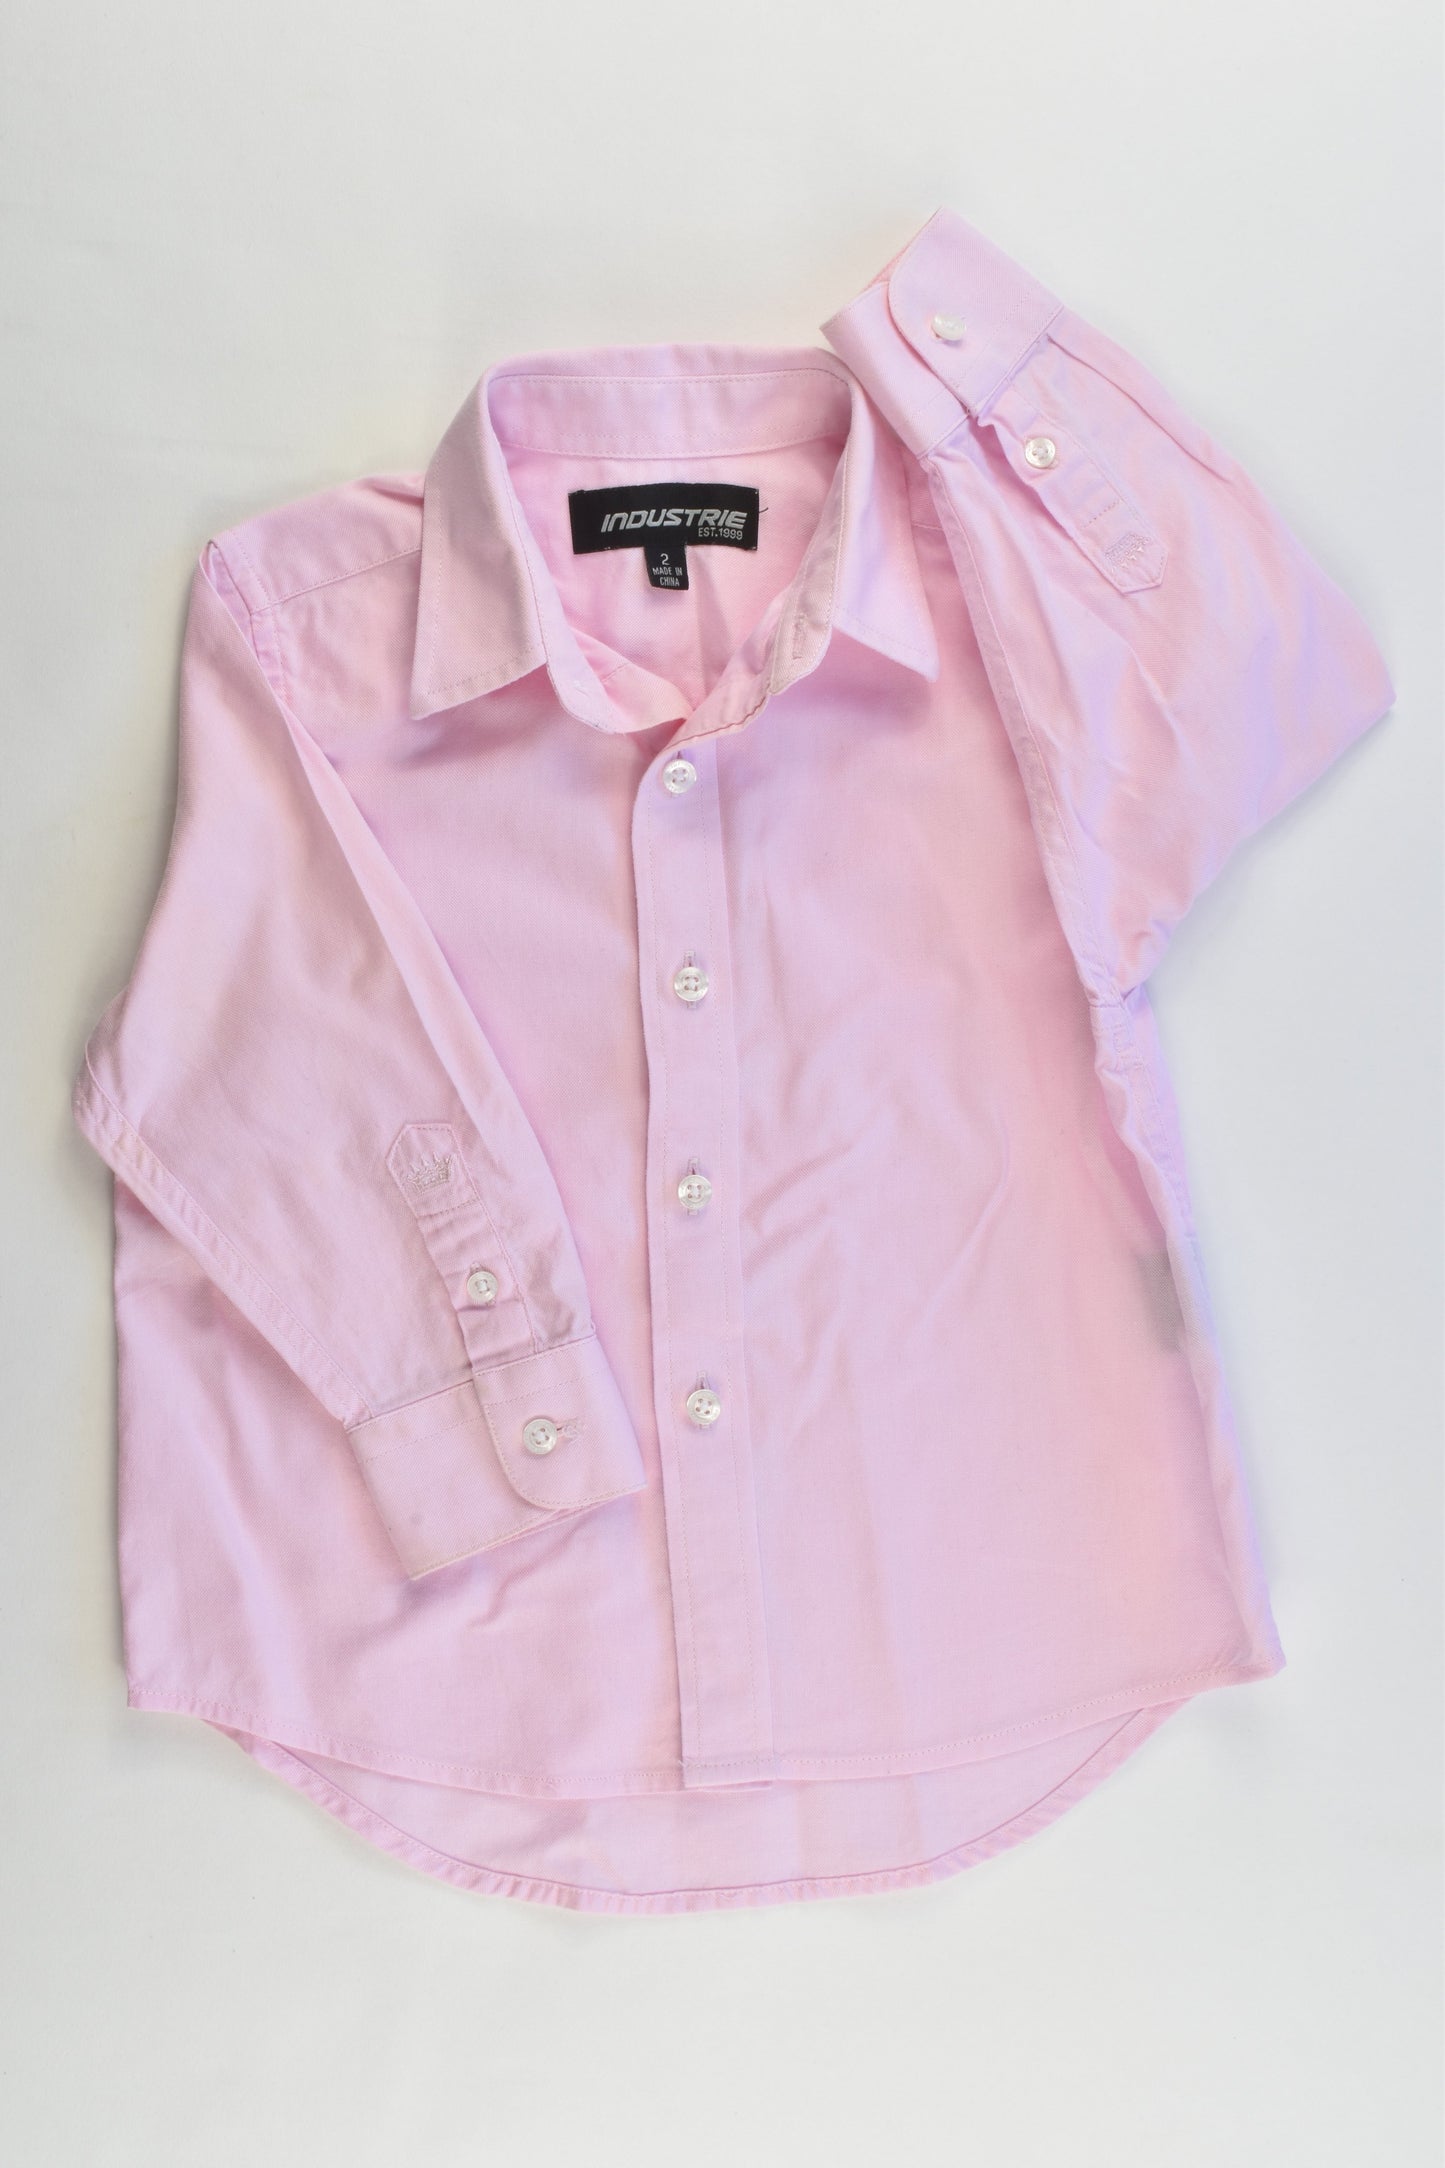 Industrie Size 2 Collared Shirt